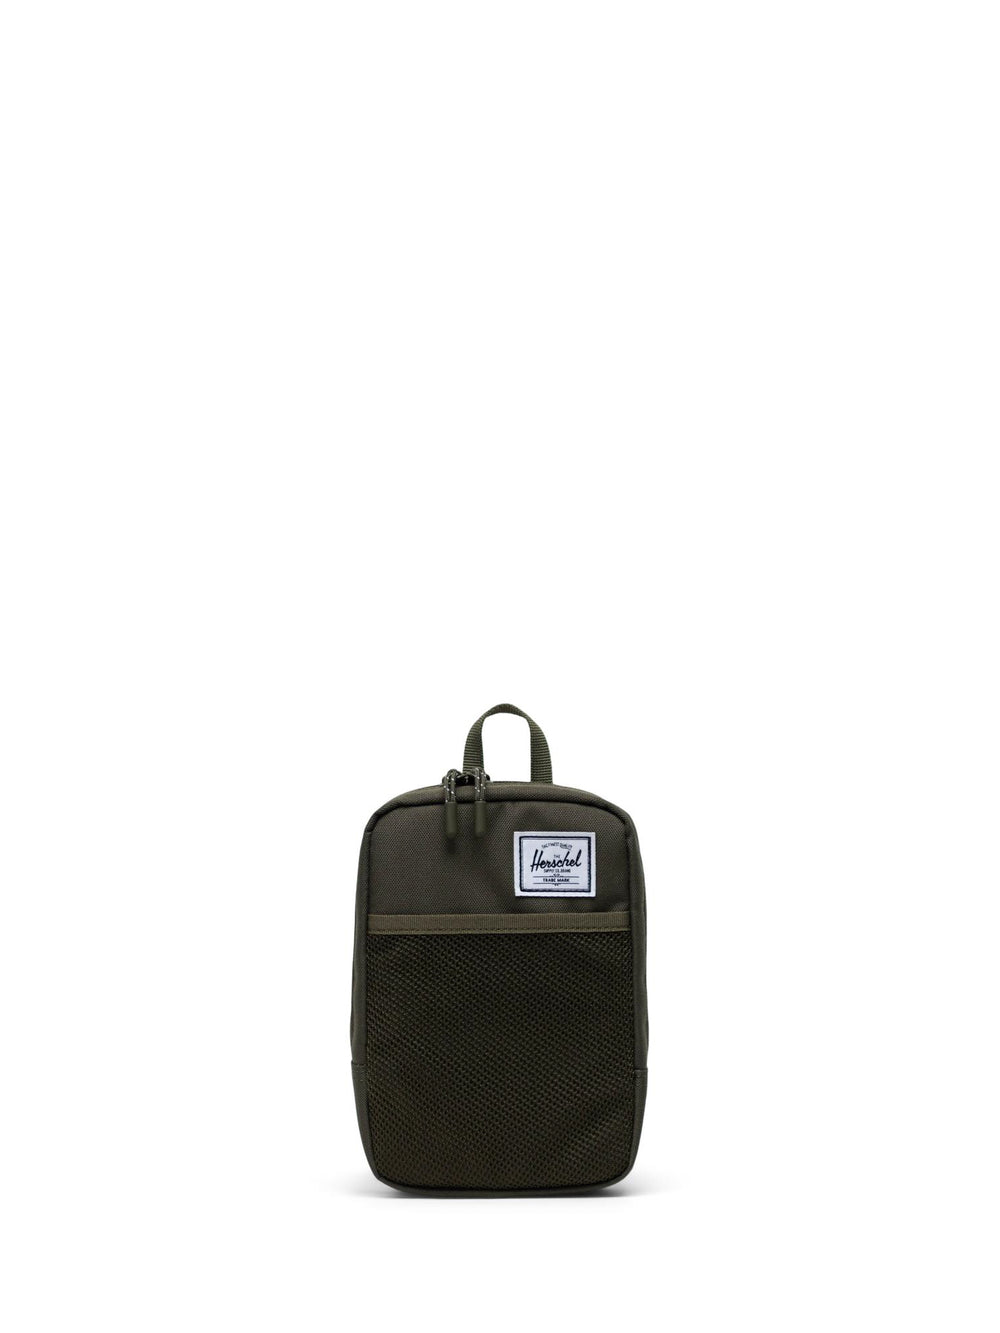 HERSCHEL SUPPLY CO. SINCLAIR LG - IVY - CLEARANCE